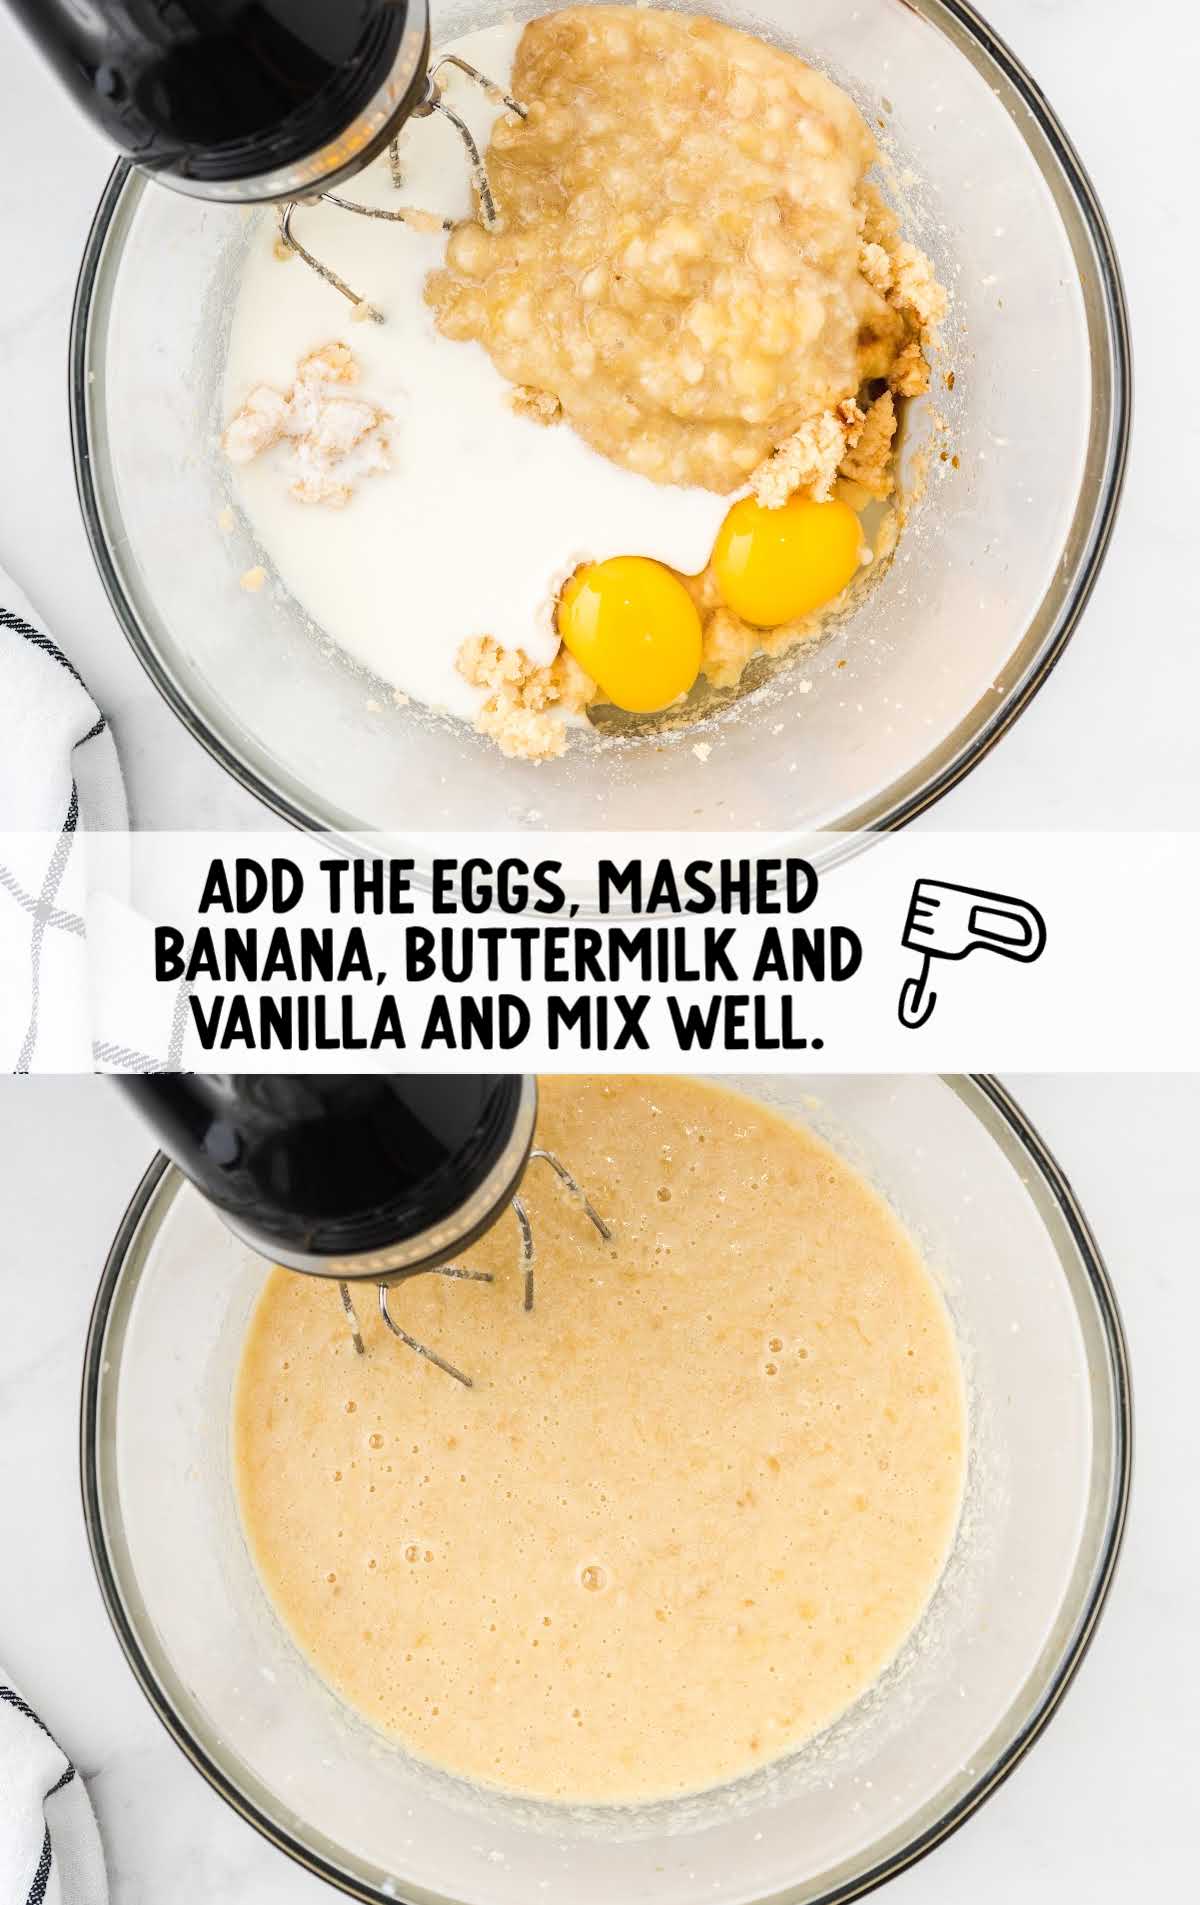 eggs, mashed bananas, buttermilk and banana added to the mixture